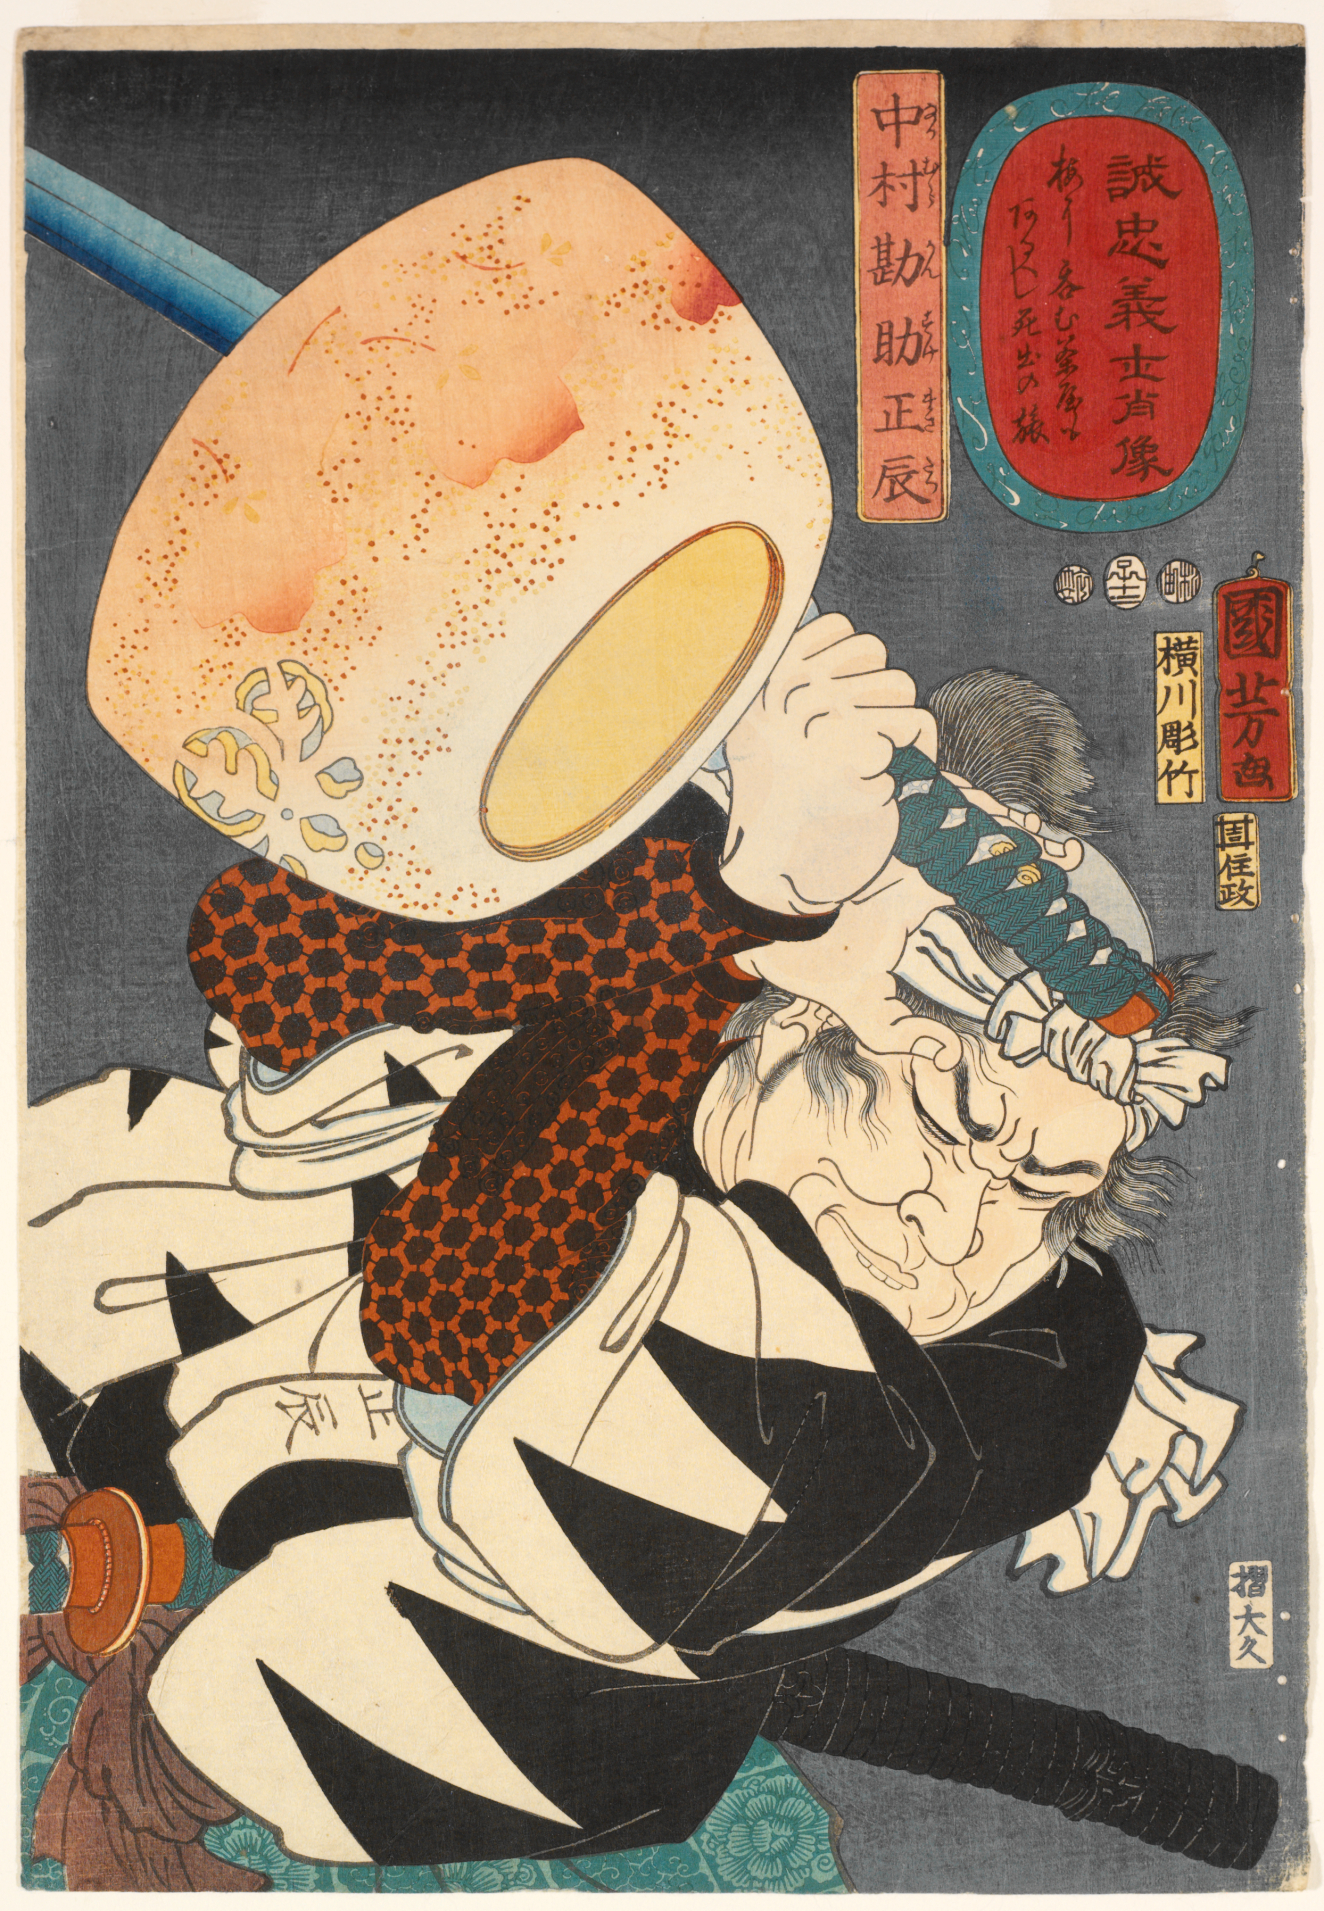 A richly colored woodblock print of a samurai wielding a sword over his head. The male presenting figure wears traditional Japanese patterned attire and determinedly looks forward. 